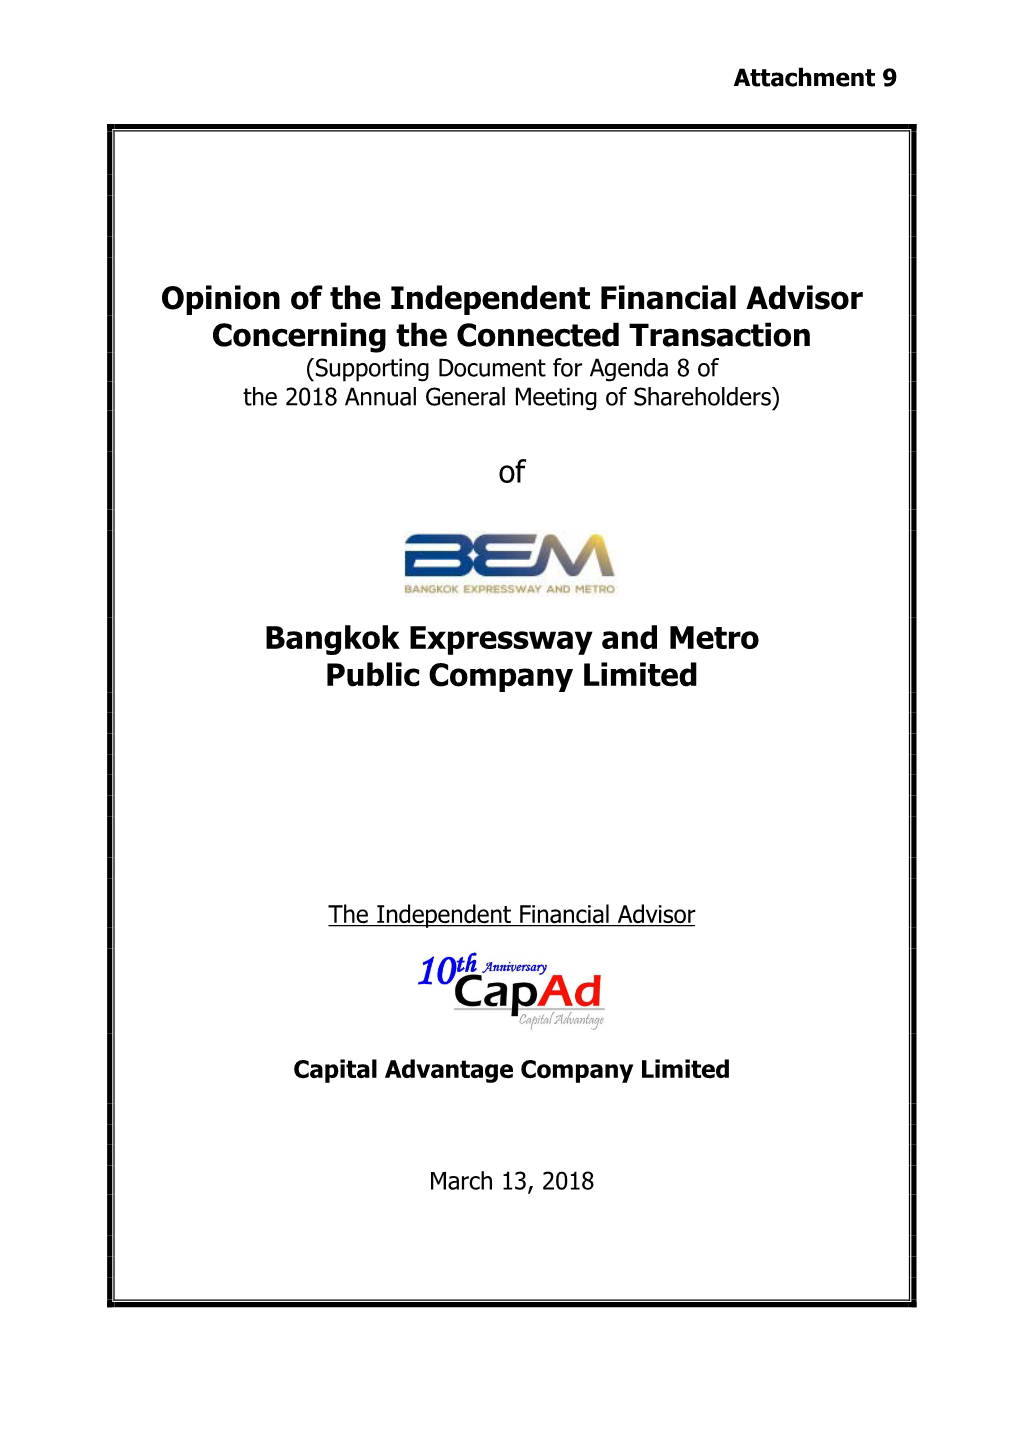 Opinion of the Independent Financial Advisor Concerning the Connected